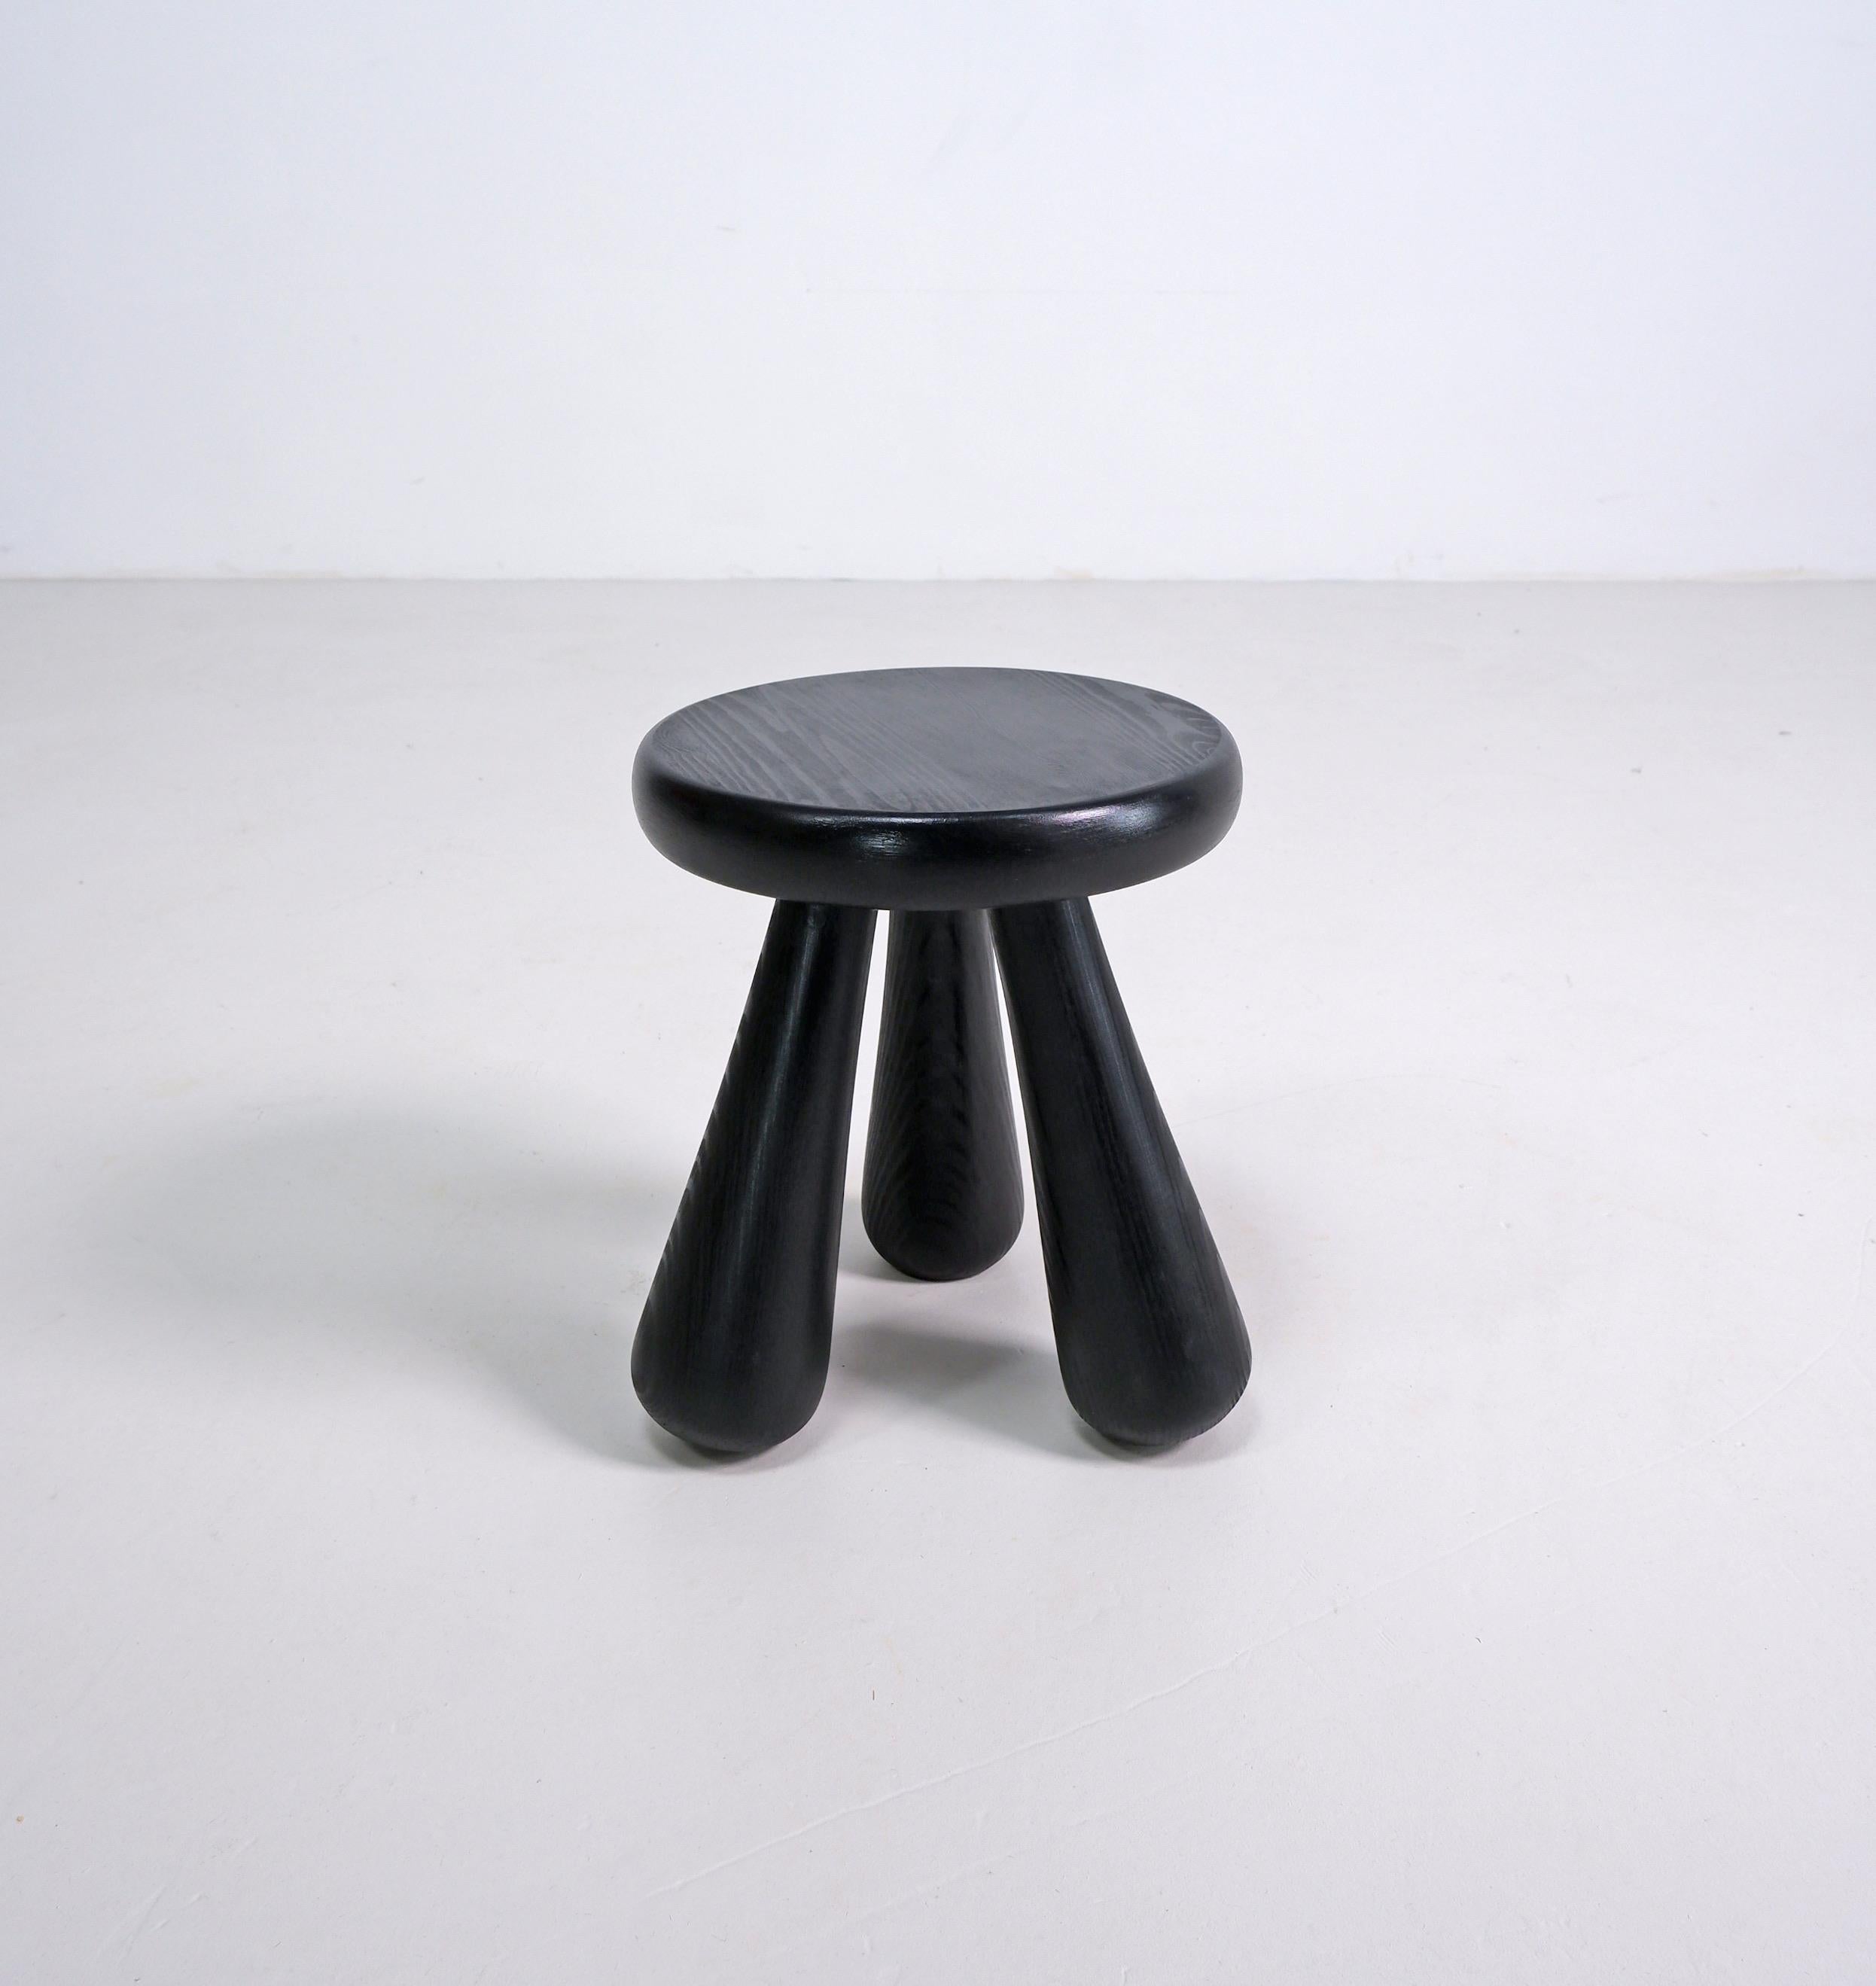 Chunky pine Swedish milking stool. Very Ingvar Hildingsson in style.
    
